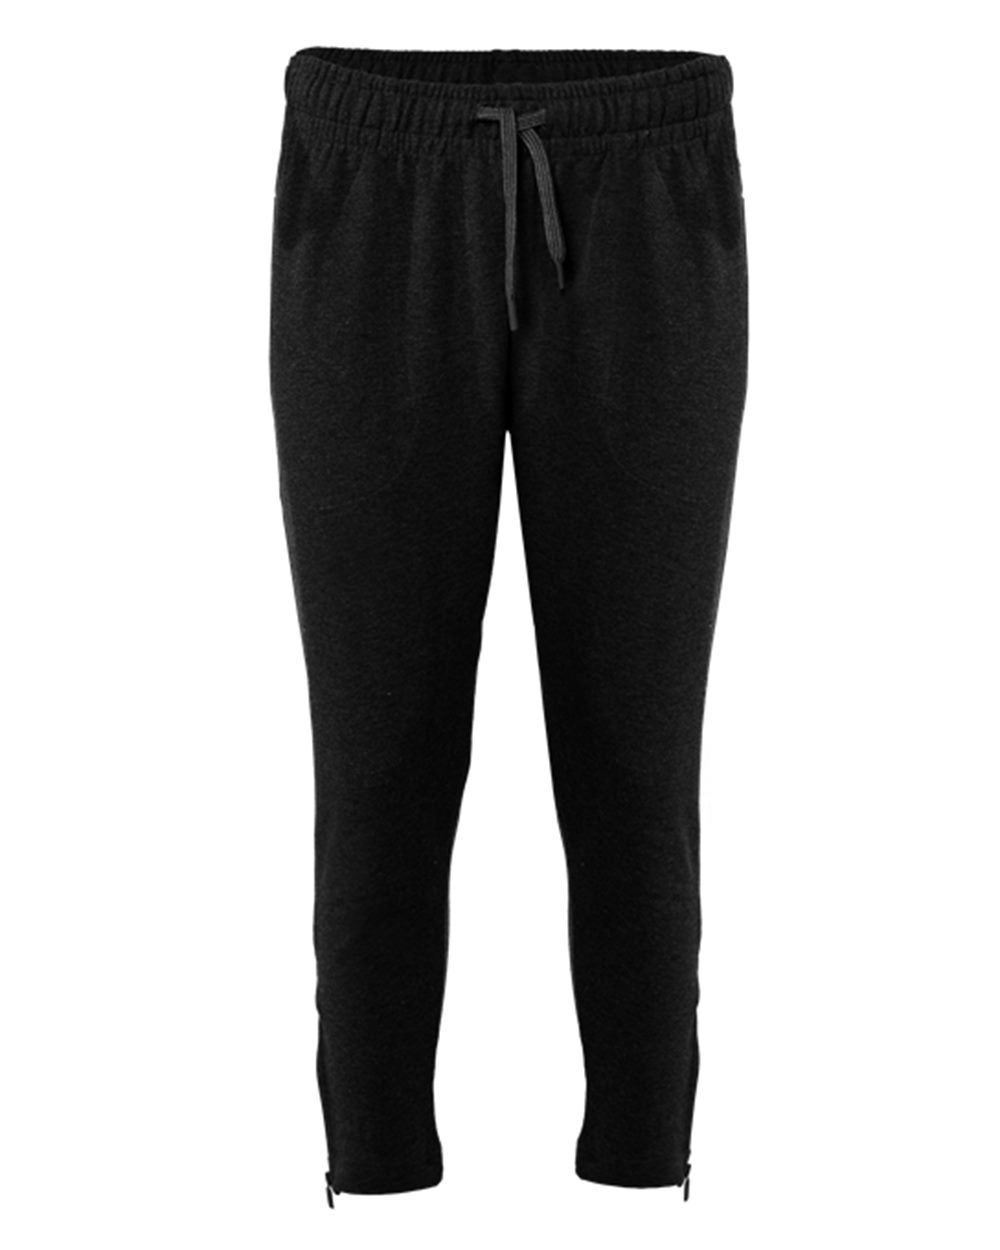 Badger 1071 - FitFlex Women's French Terry Ankle Pants